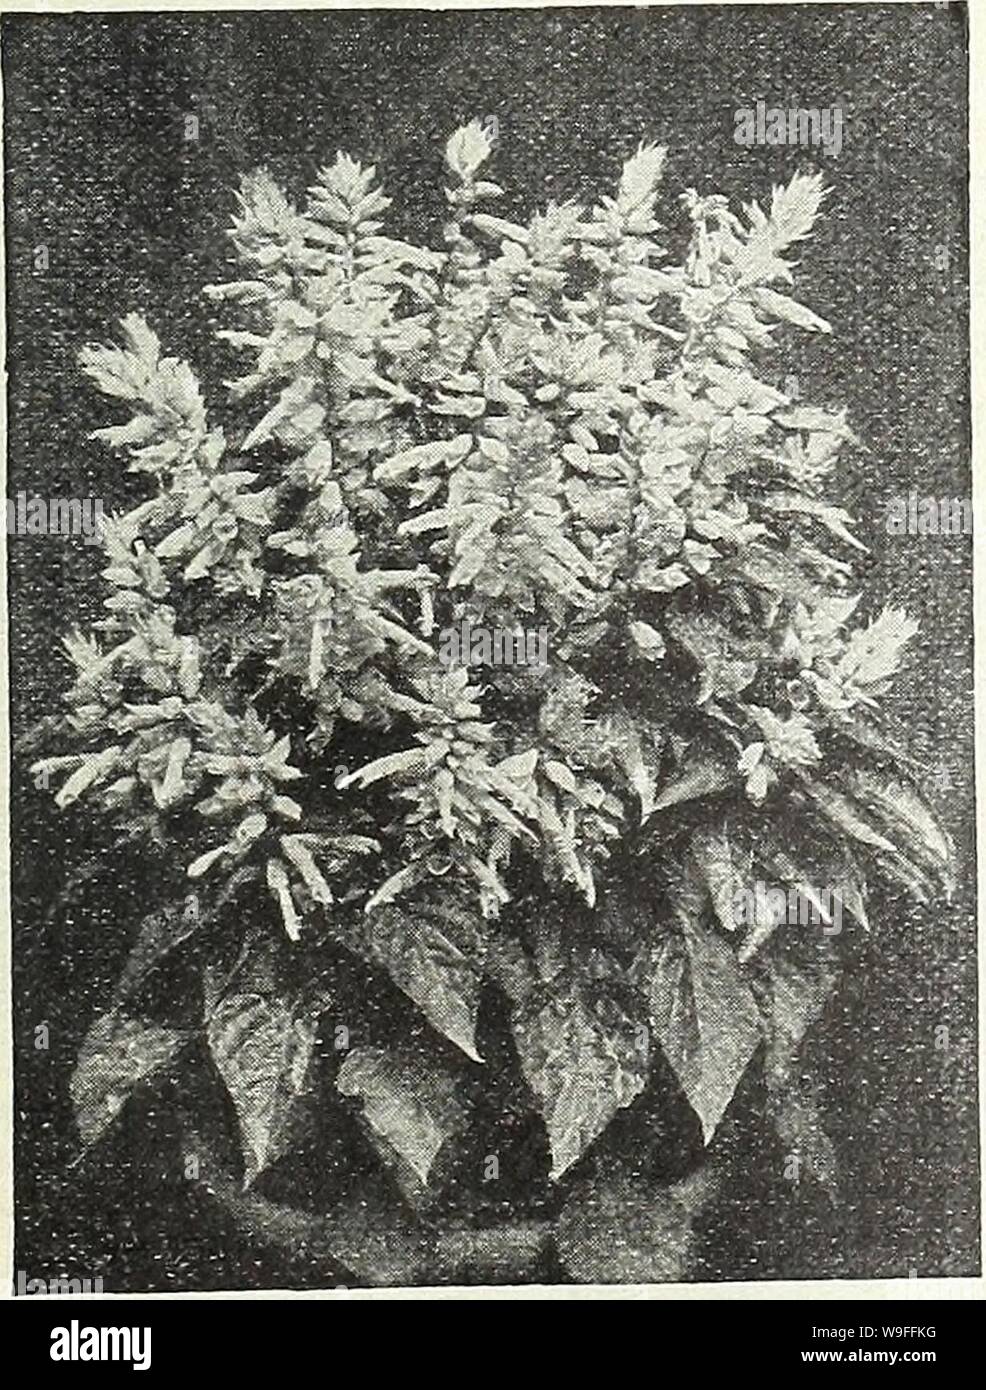 Archive image from page 38 of Currie Bros  fifty-eighth year. Currie Bros. : fifty-eighth year 1933  curriebrosfiftye19curr Year: 1933 ( MILWAUKEE, WISCONSIN Page 35 f: SOLANUM A very useful ornamental pot plant for winter decoration, bearing in the greatest profusion, bright scarlet, globular berries. CAPSICASTRUM NANUM (Jerusalem Cherry) Pkt. 10c CLEVELANDI (Cleveland Cherry)—An improvement on the foregoing, carrying the fruits well above the foliage and in greater profusion Pkt. 20c    RICINUS (Castor Oil Plant) Grand semi'tropical plants with highly ornamental foliage, strikingly eifective Stock Photo